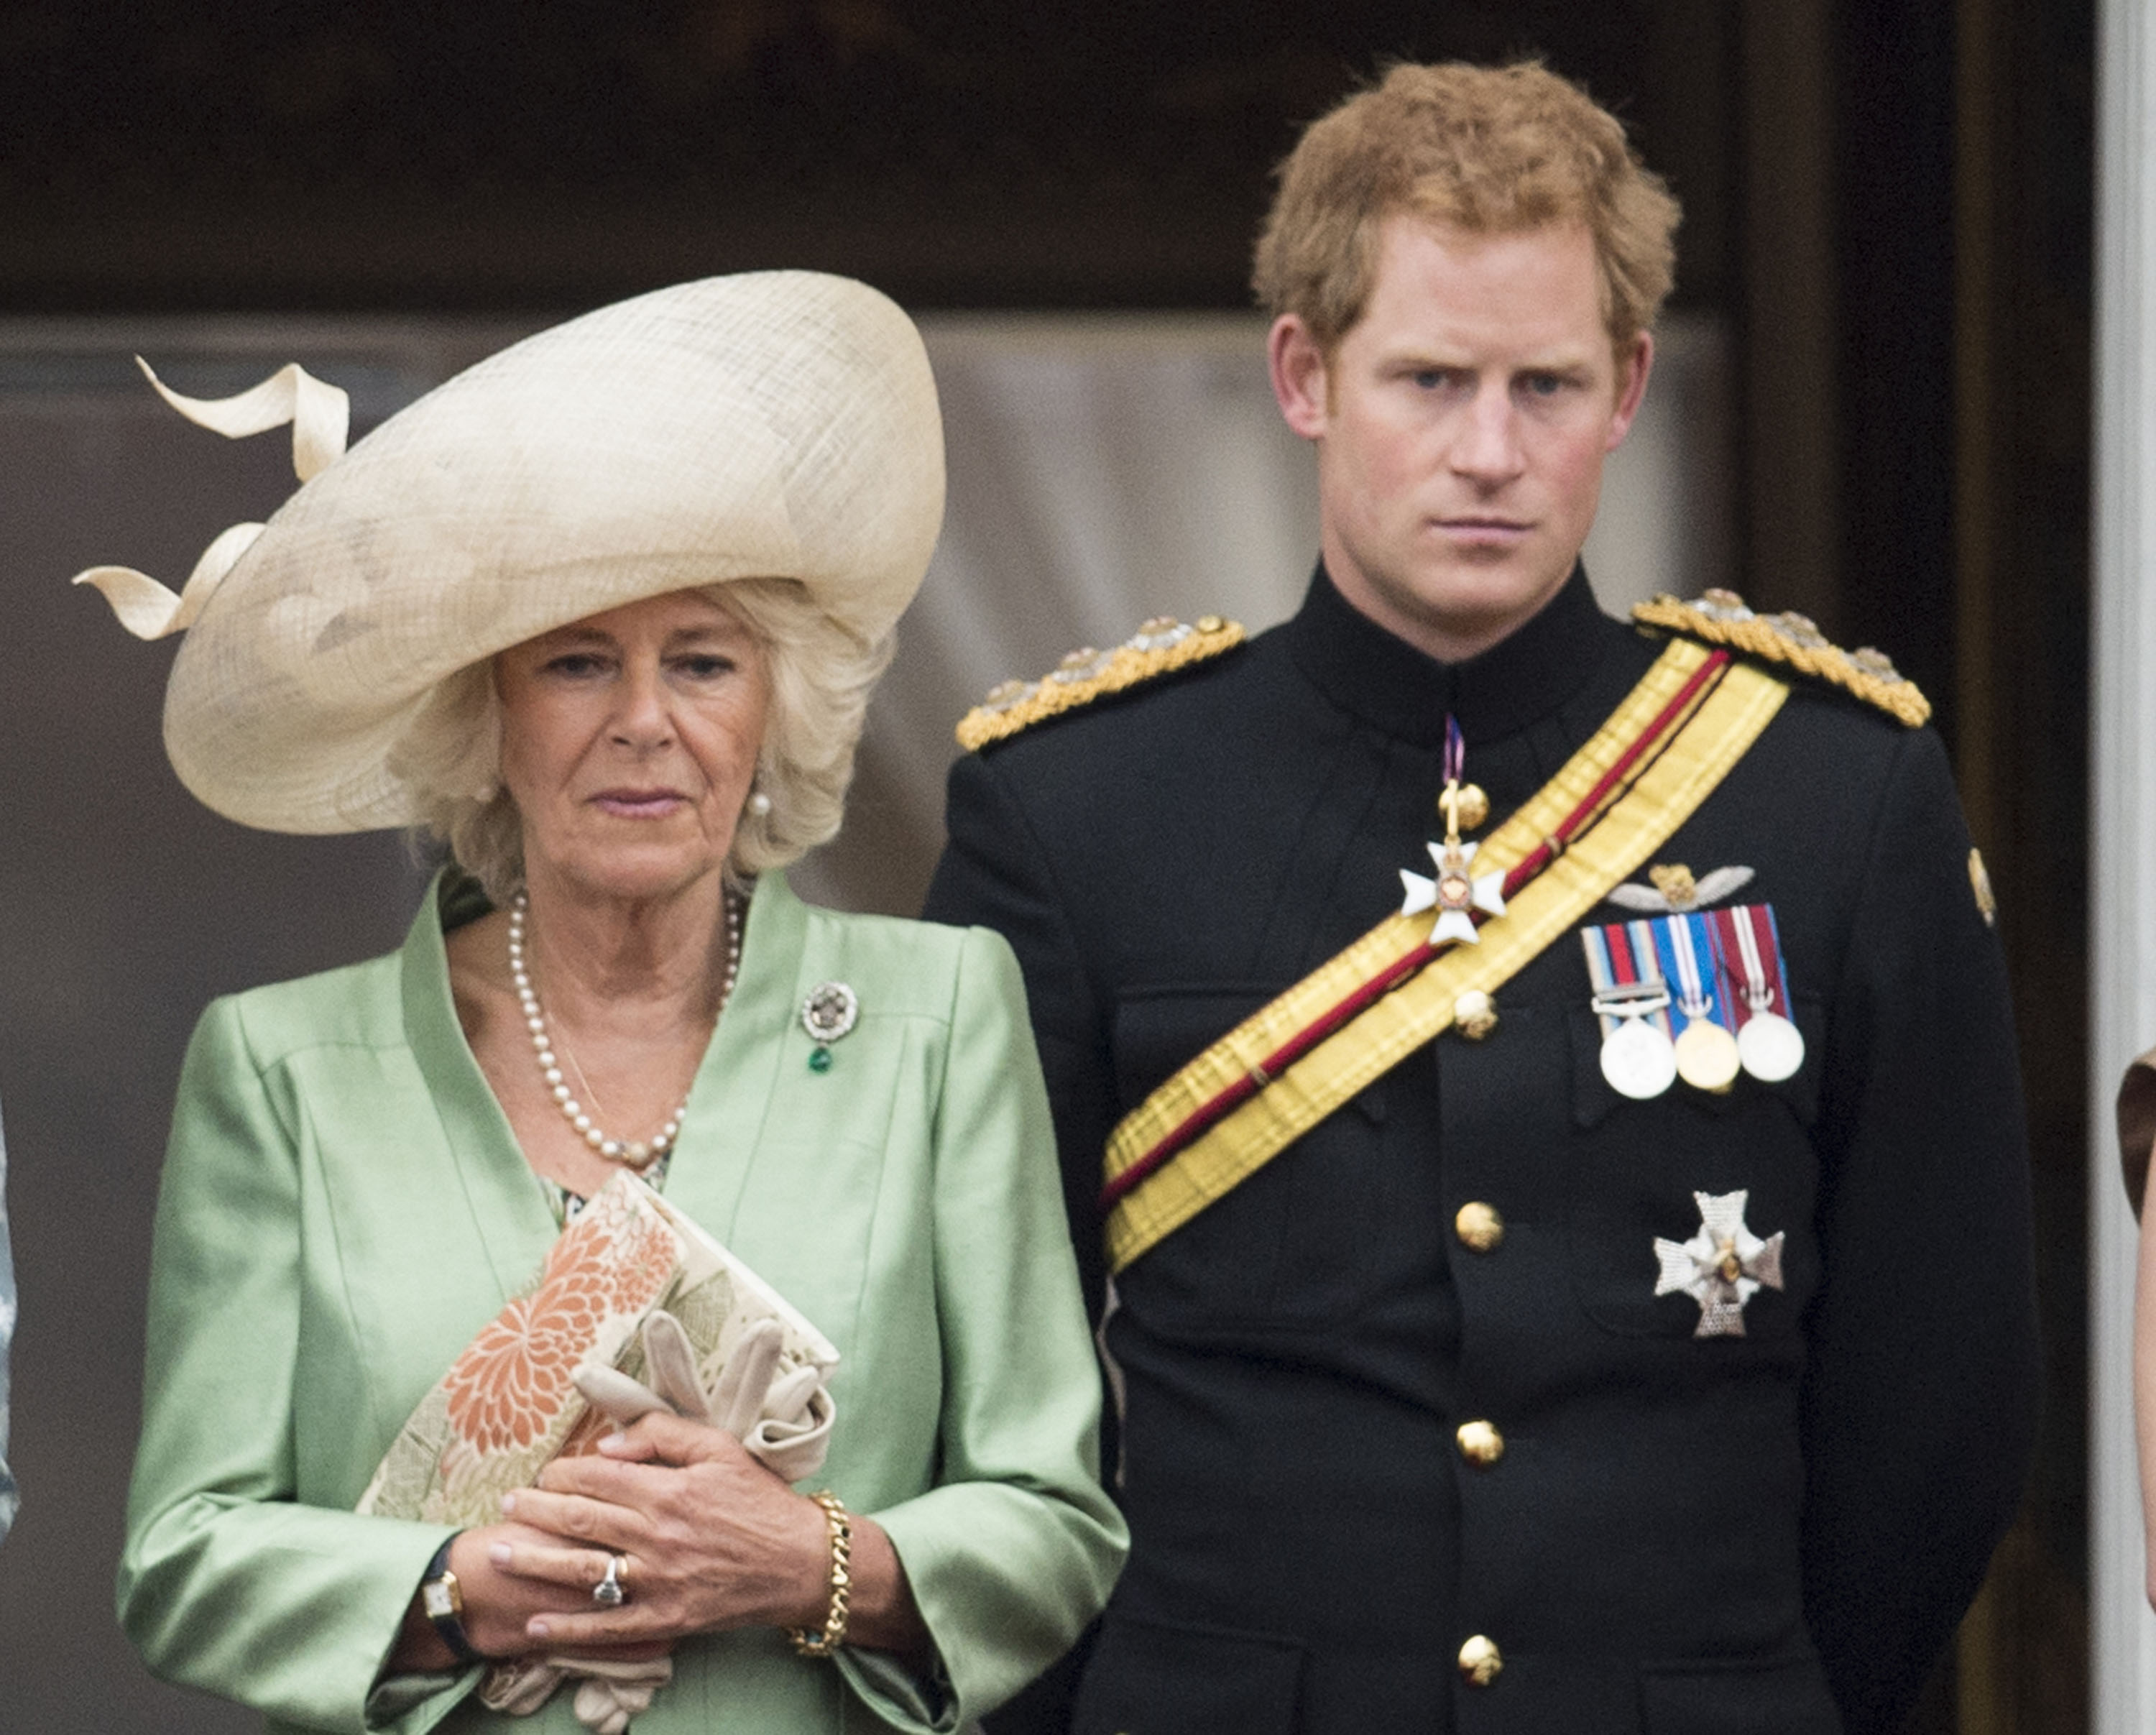 Camilla Parker Bowles and Prince Harry stand side by side at the Trooping The Color ceremony at Buckingham Palace in 2015.